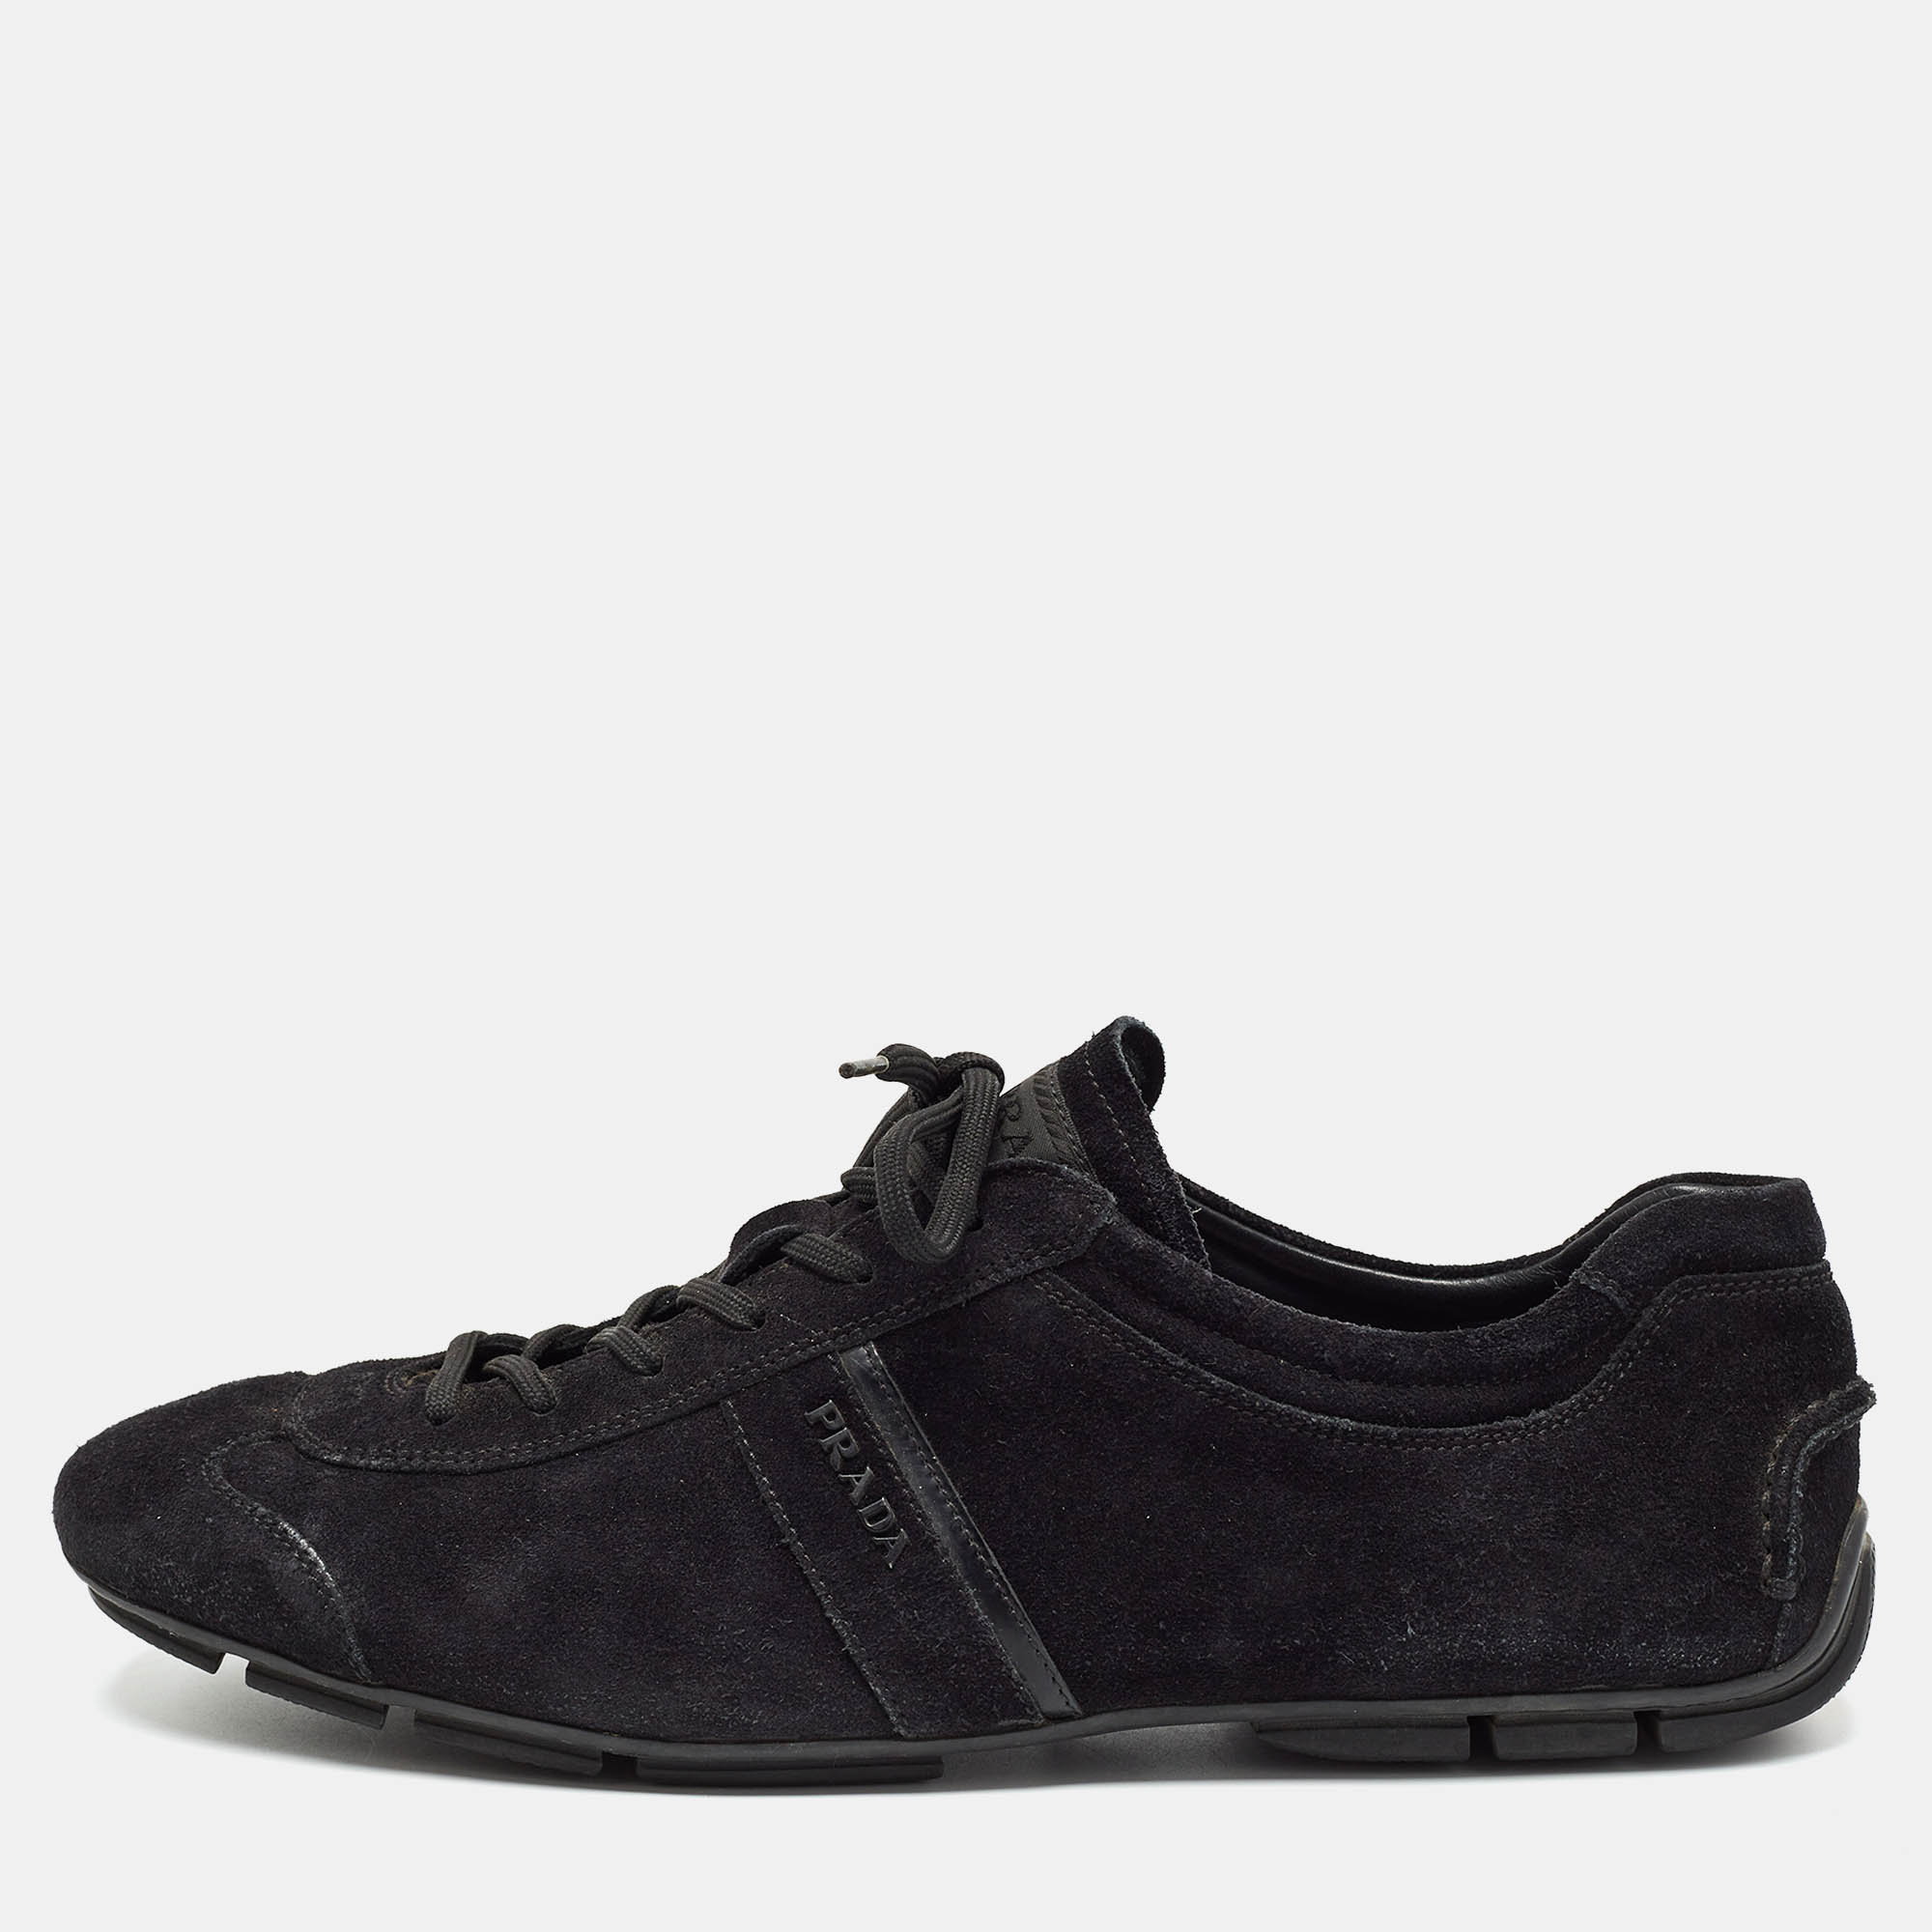 Pre-owned Prada Black Suede Lace Up Sneakers Size 43